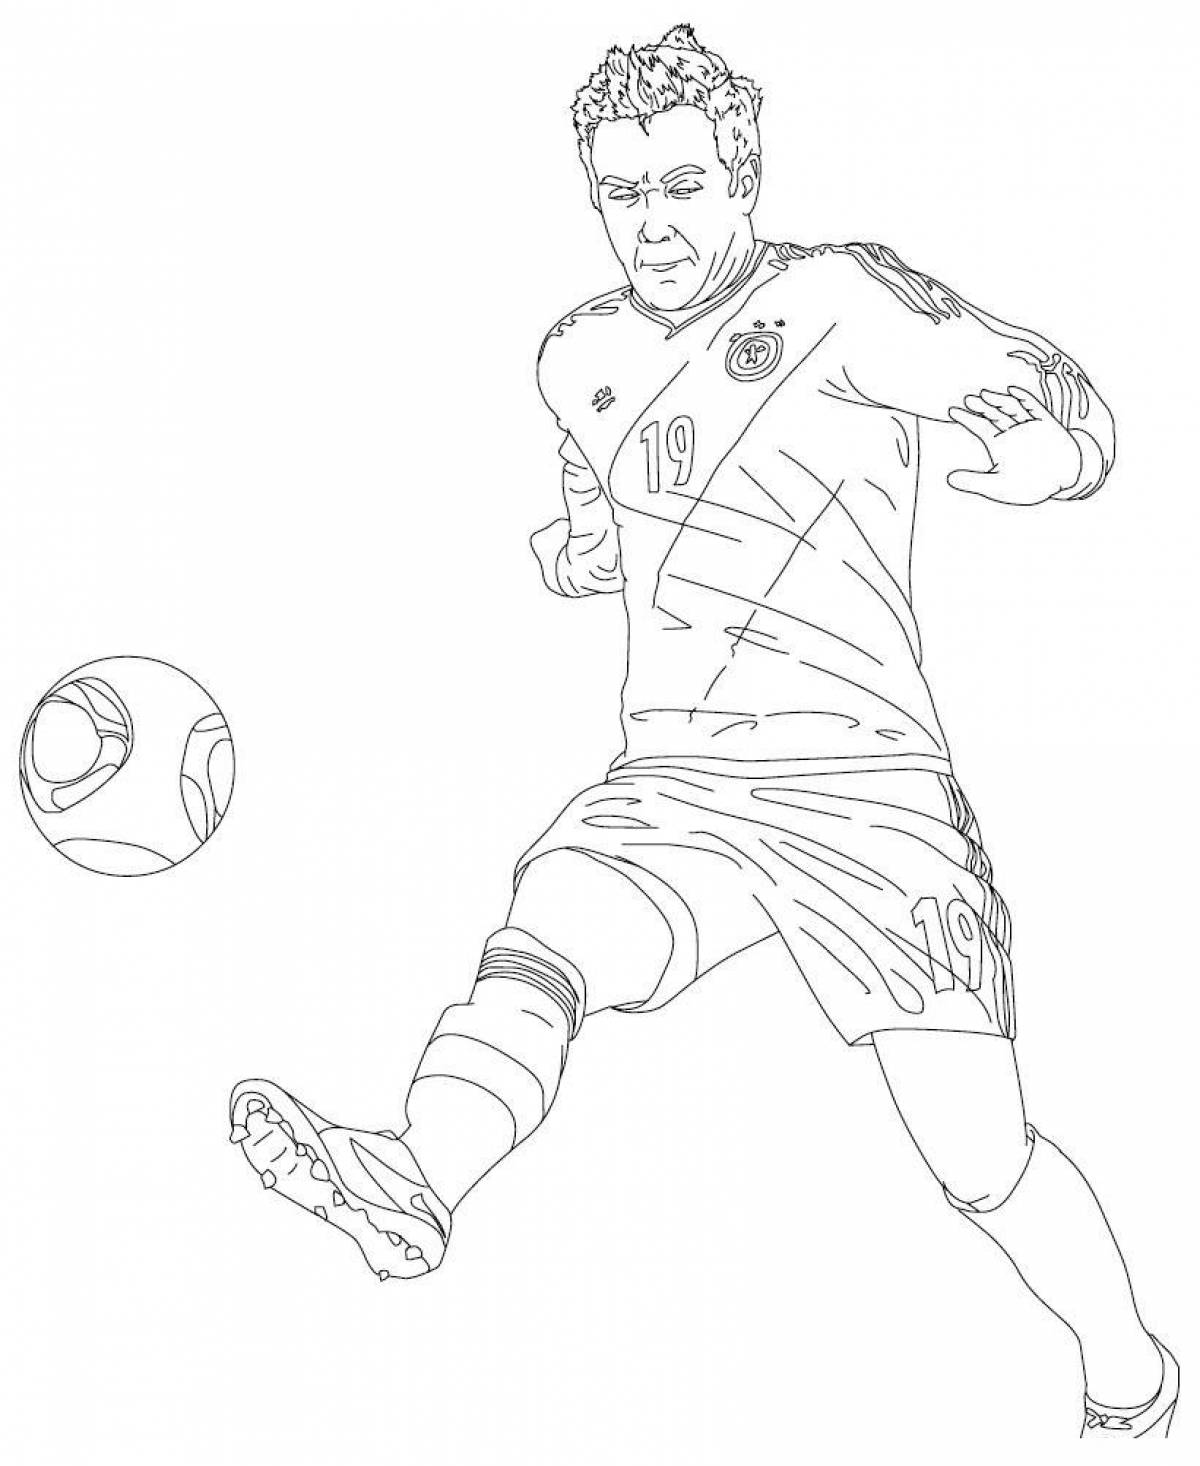 Graceful soccer player coloring page